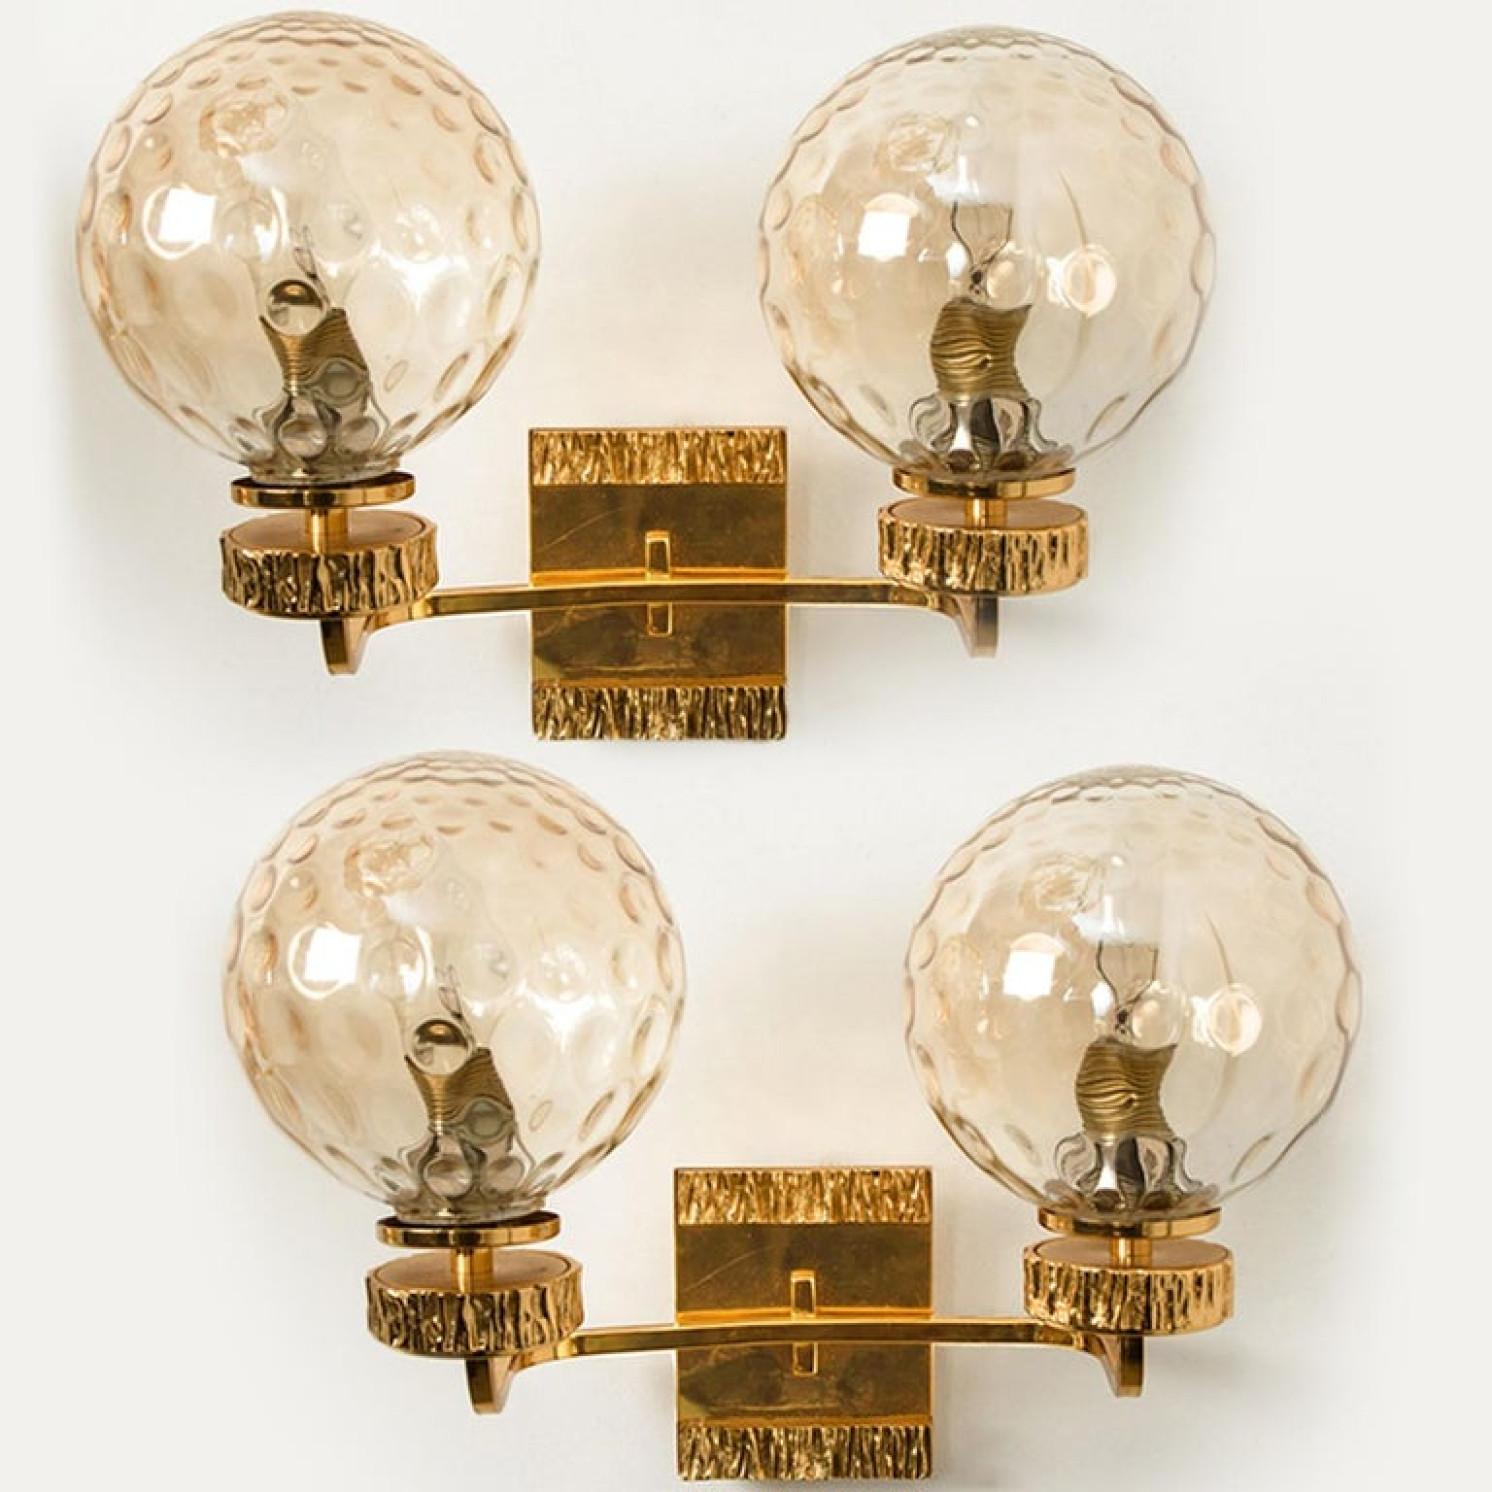 This stunning set of wall lights with each one glass bowl and gold-plated fittings was produced in the 1970s in the style of Brotto. Illuminates beautifully. Elegant and fine, it is comfortable with all decor periods.

Sizes of the wall light H 9.85